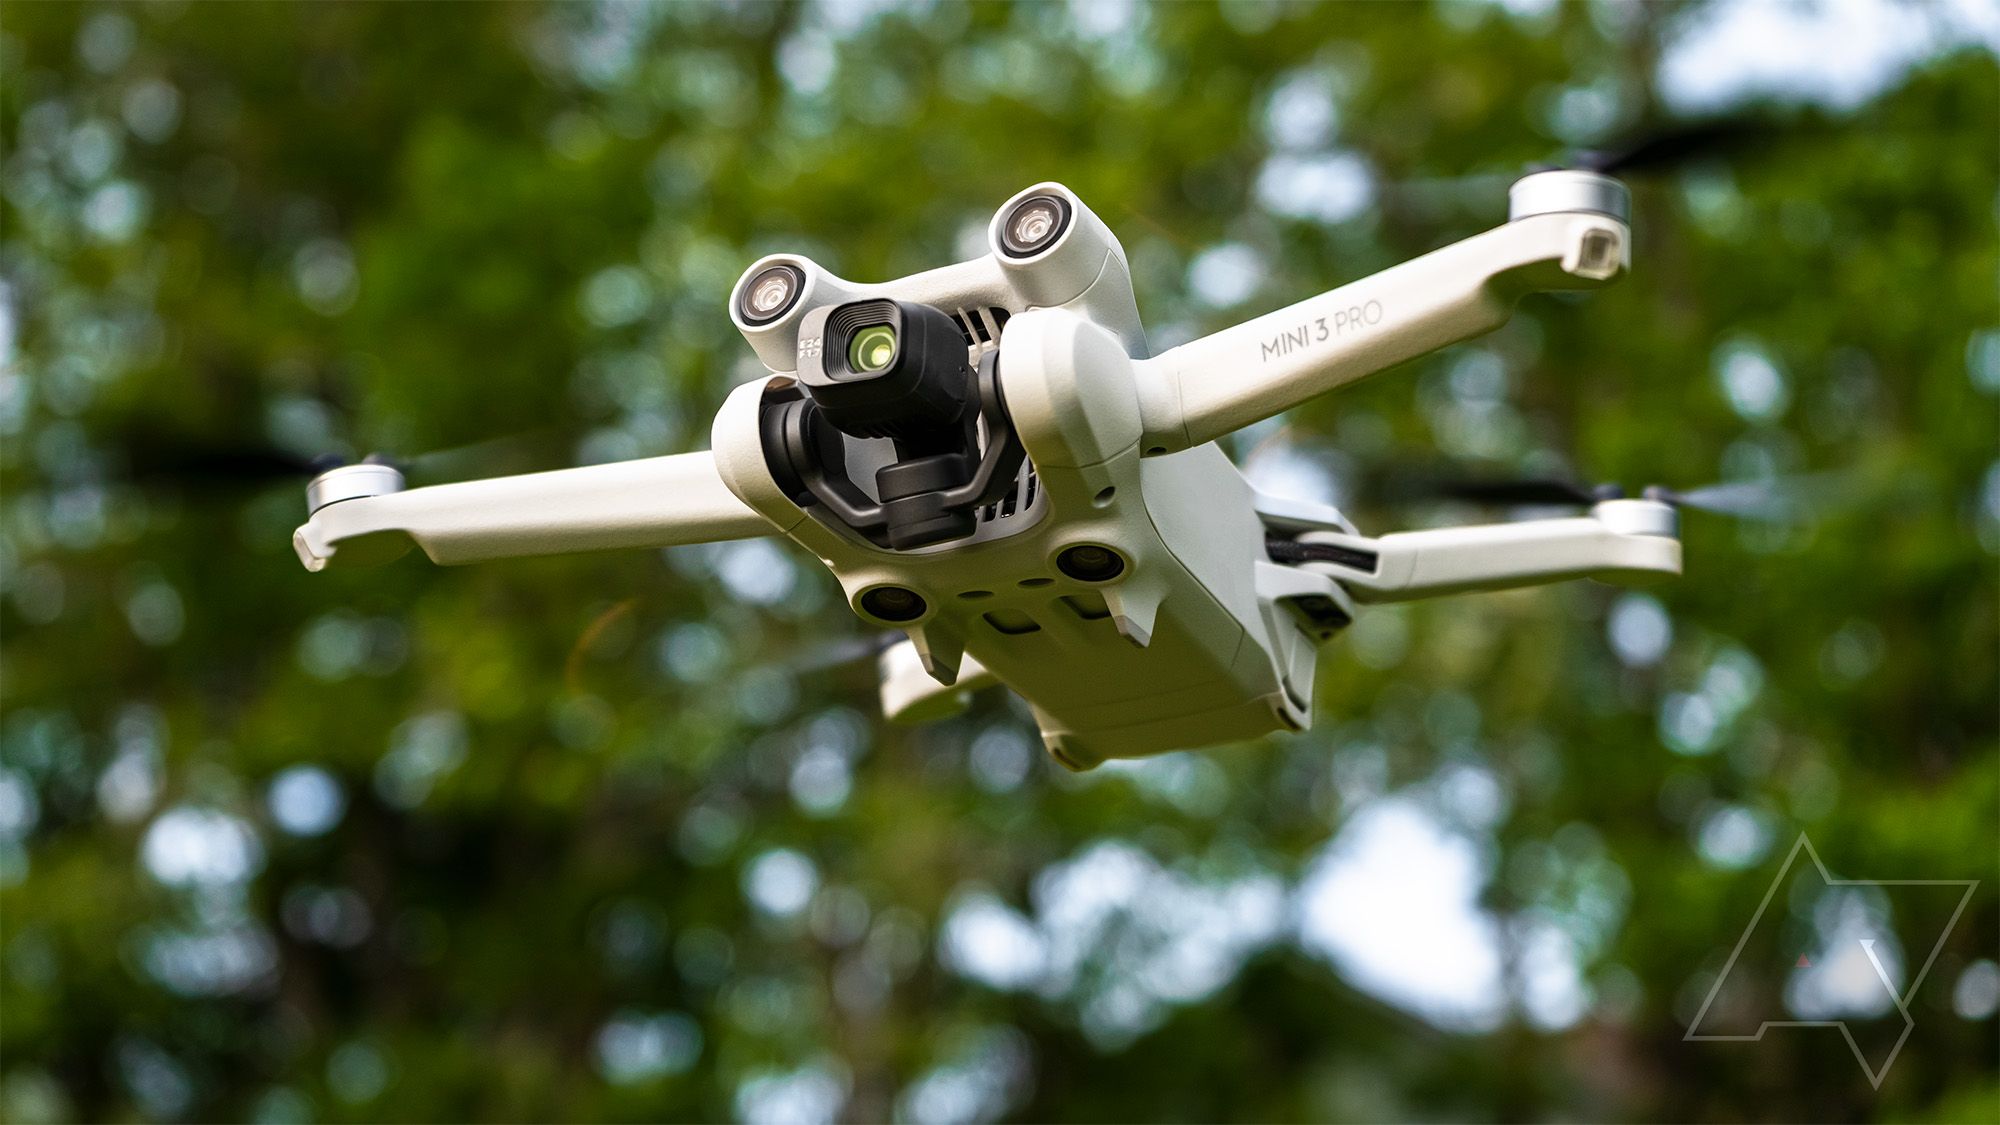 dji-mini-3-pro-review-the-best-pick-for-a-small-drone-flipboard